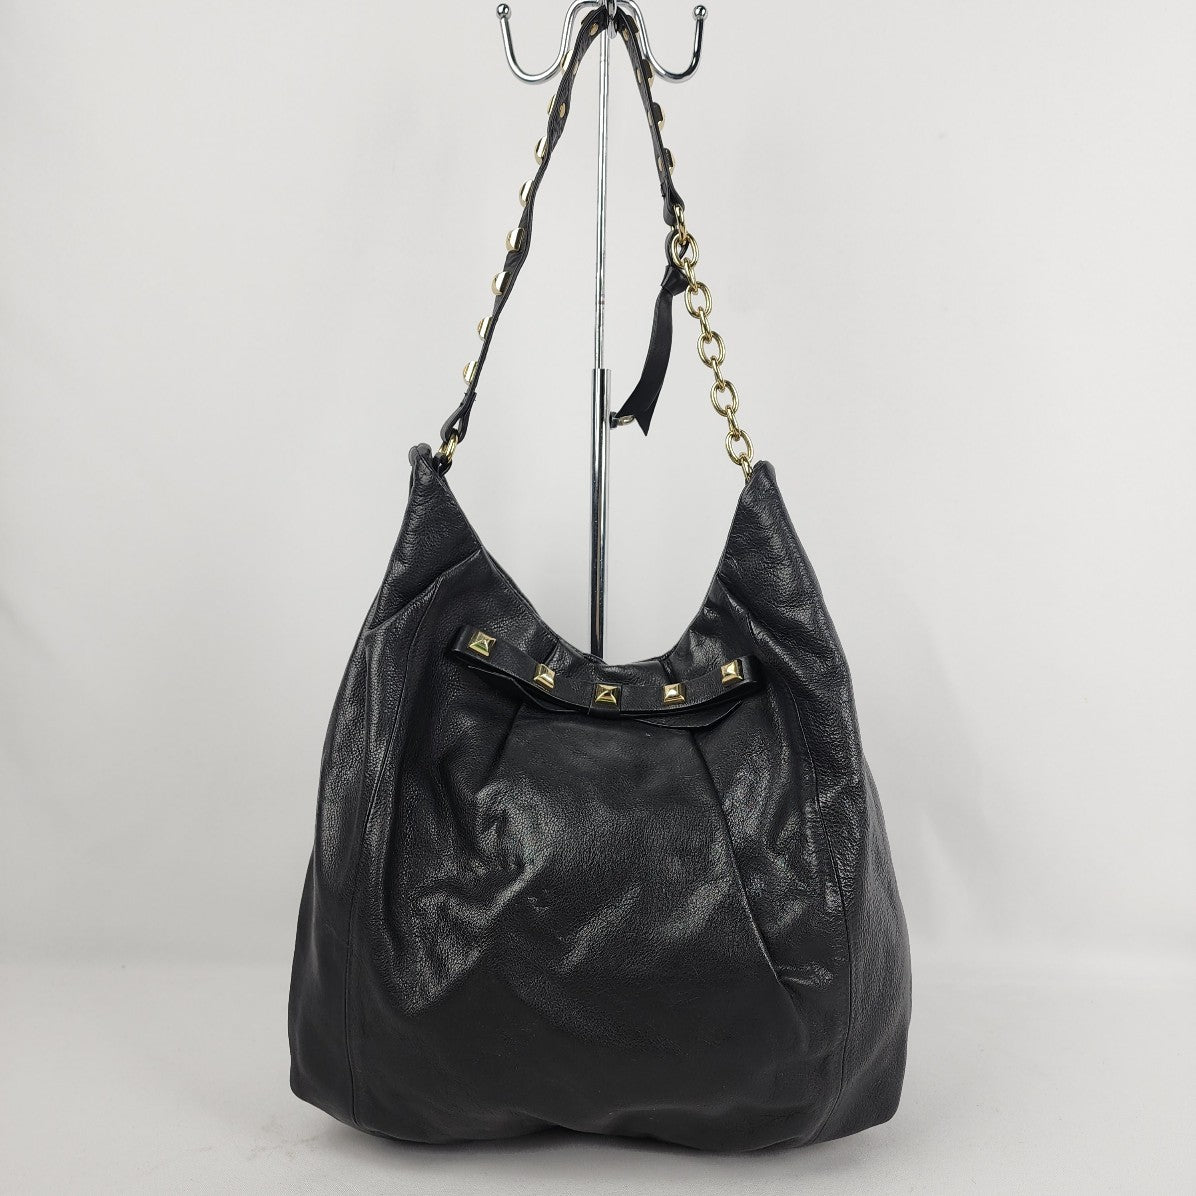 Guess Black Leather Gold Studded Hobo Purse